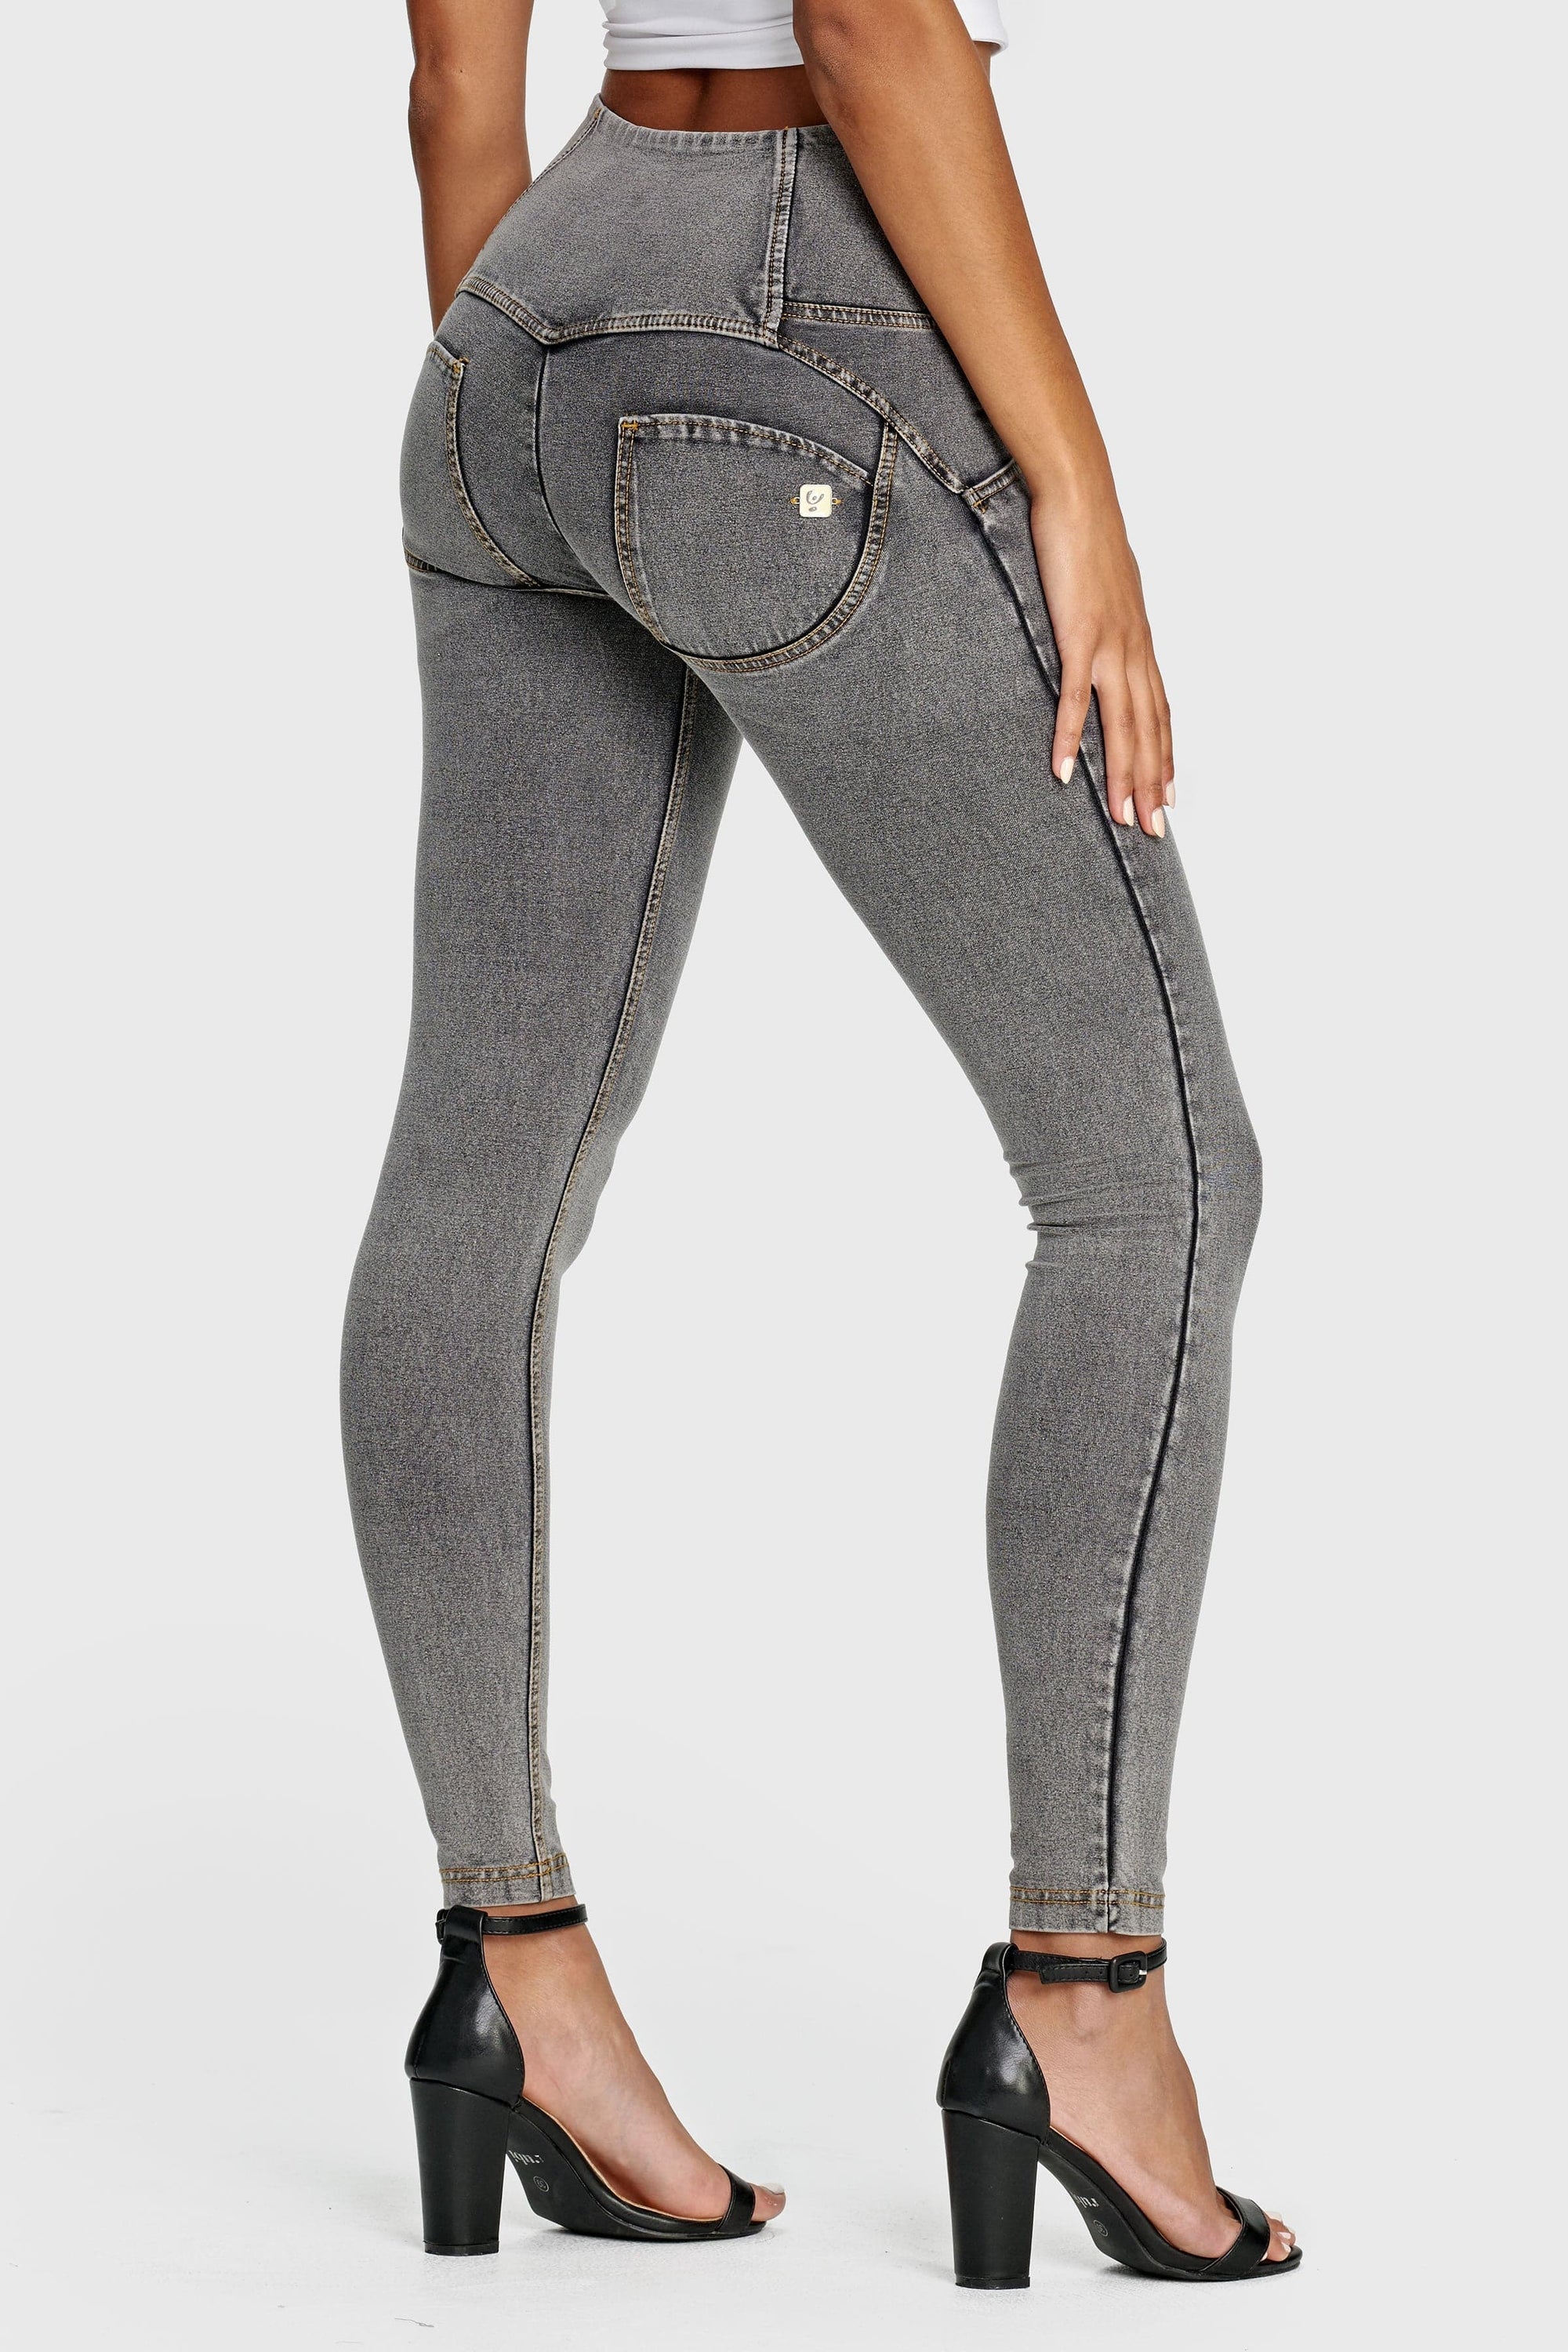 WR.UP® Denim - 3 Button High Waisted - Full Length - Grey + Yellow Stitching 2